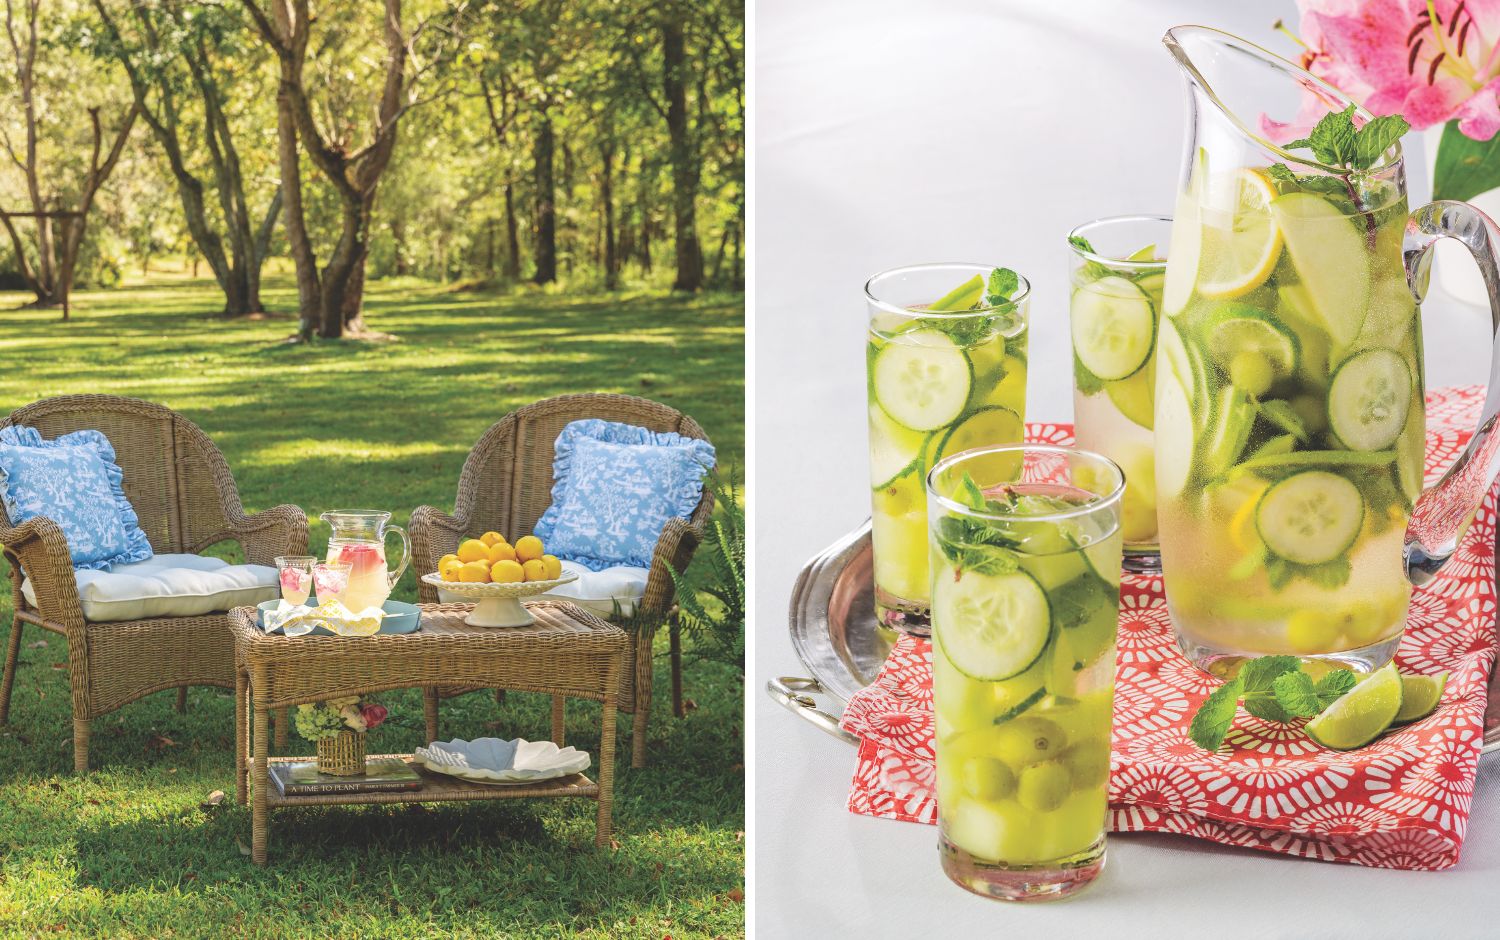 5 Refreshing Beverages to Beat the Southern Heat